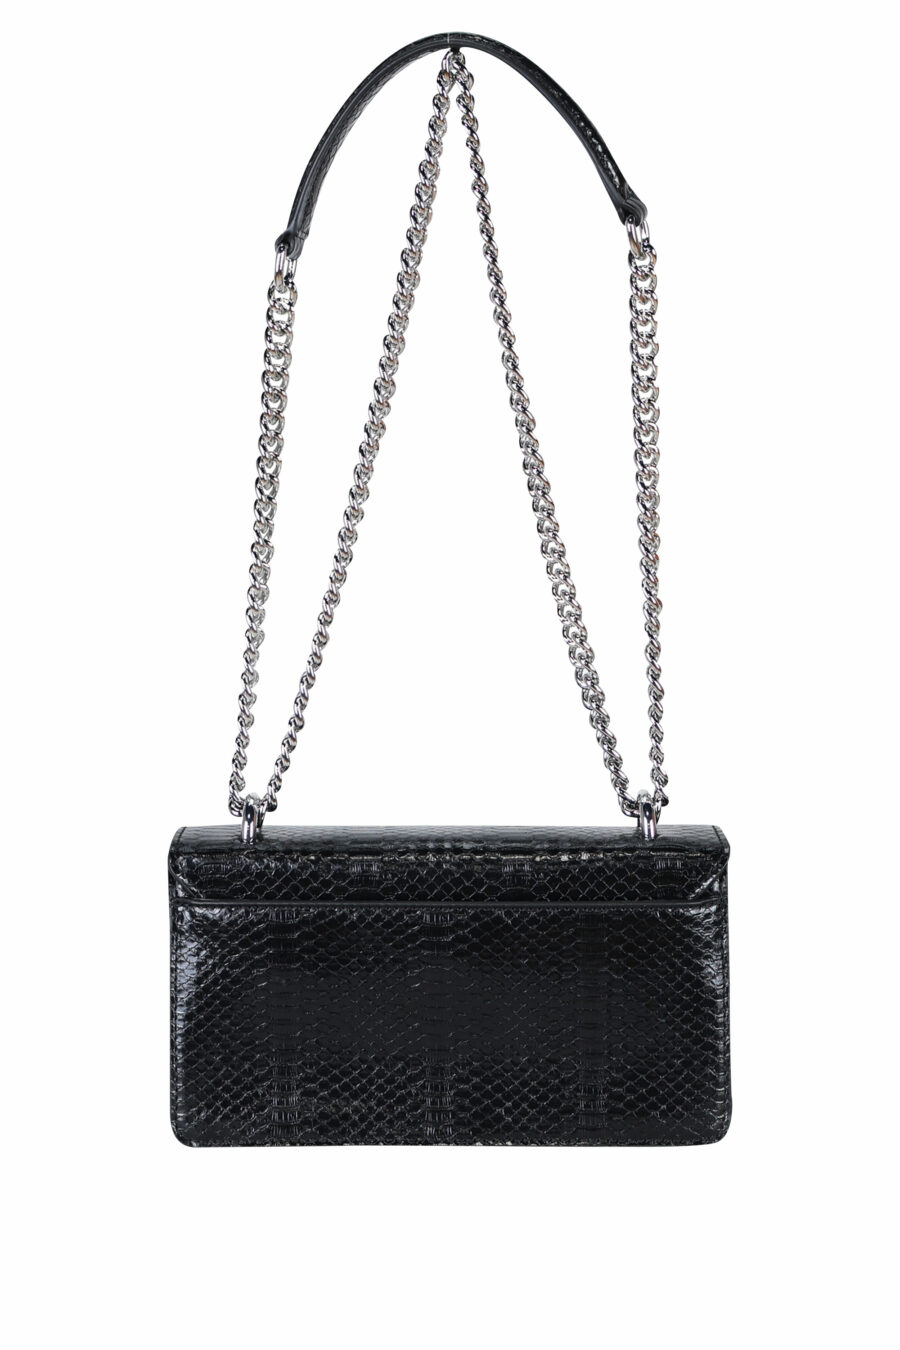 Black shoulder bag with snake texture "flap" with silver maxilogo "lettering" - 8052019408416 2